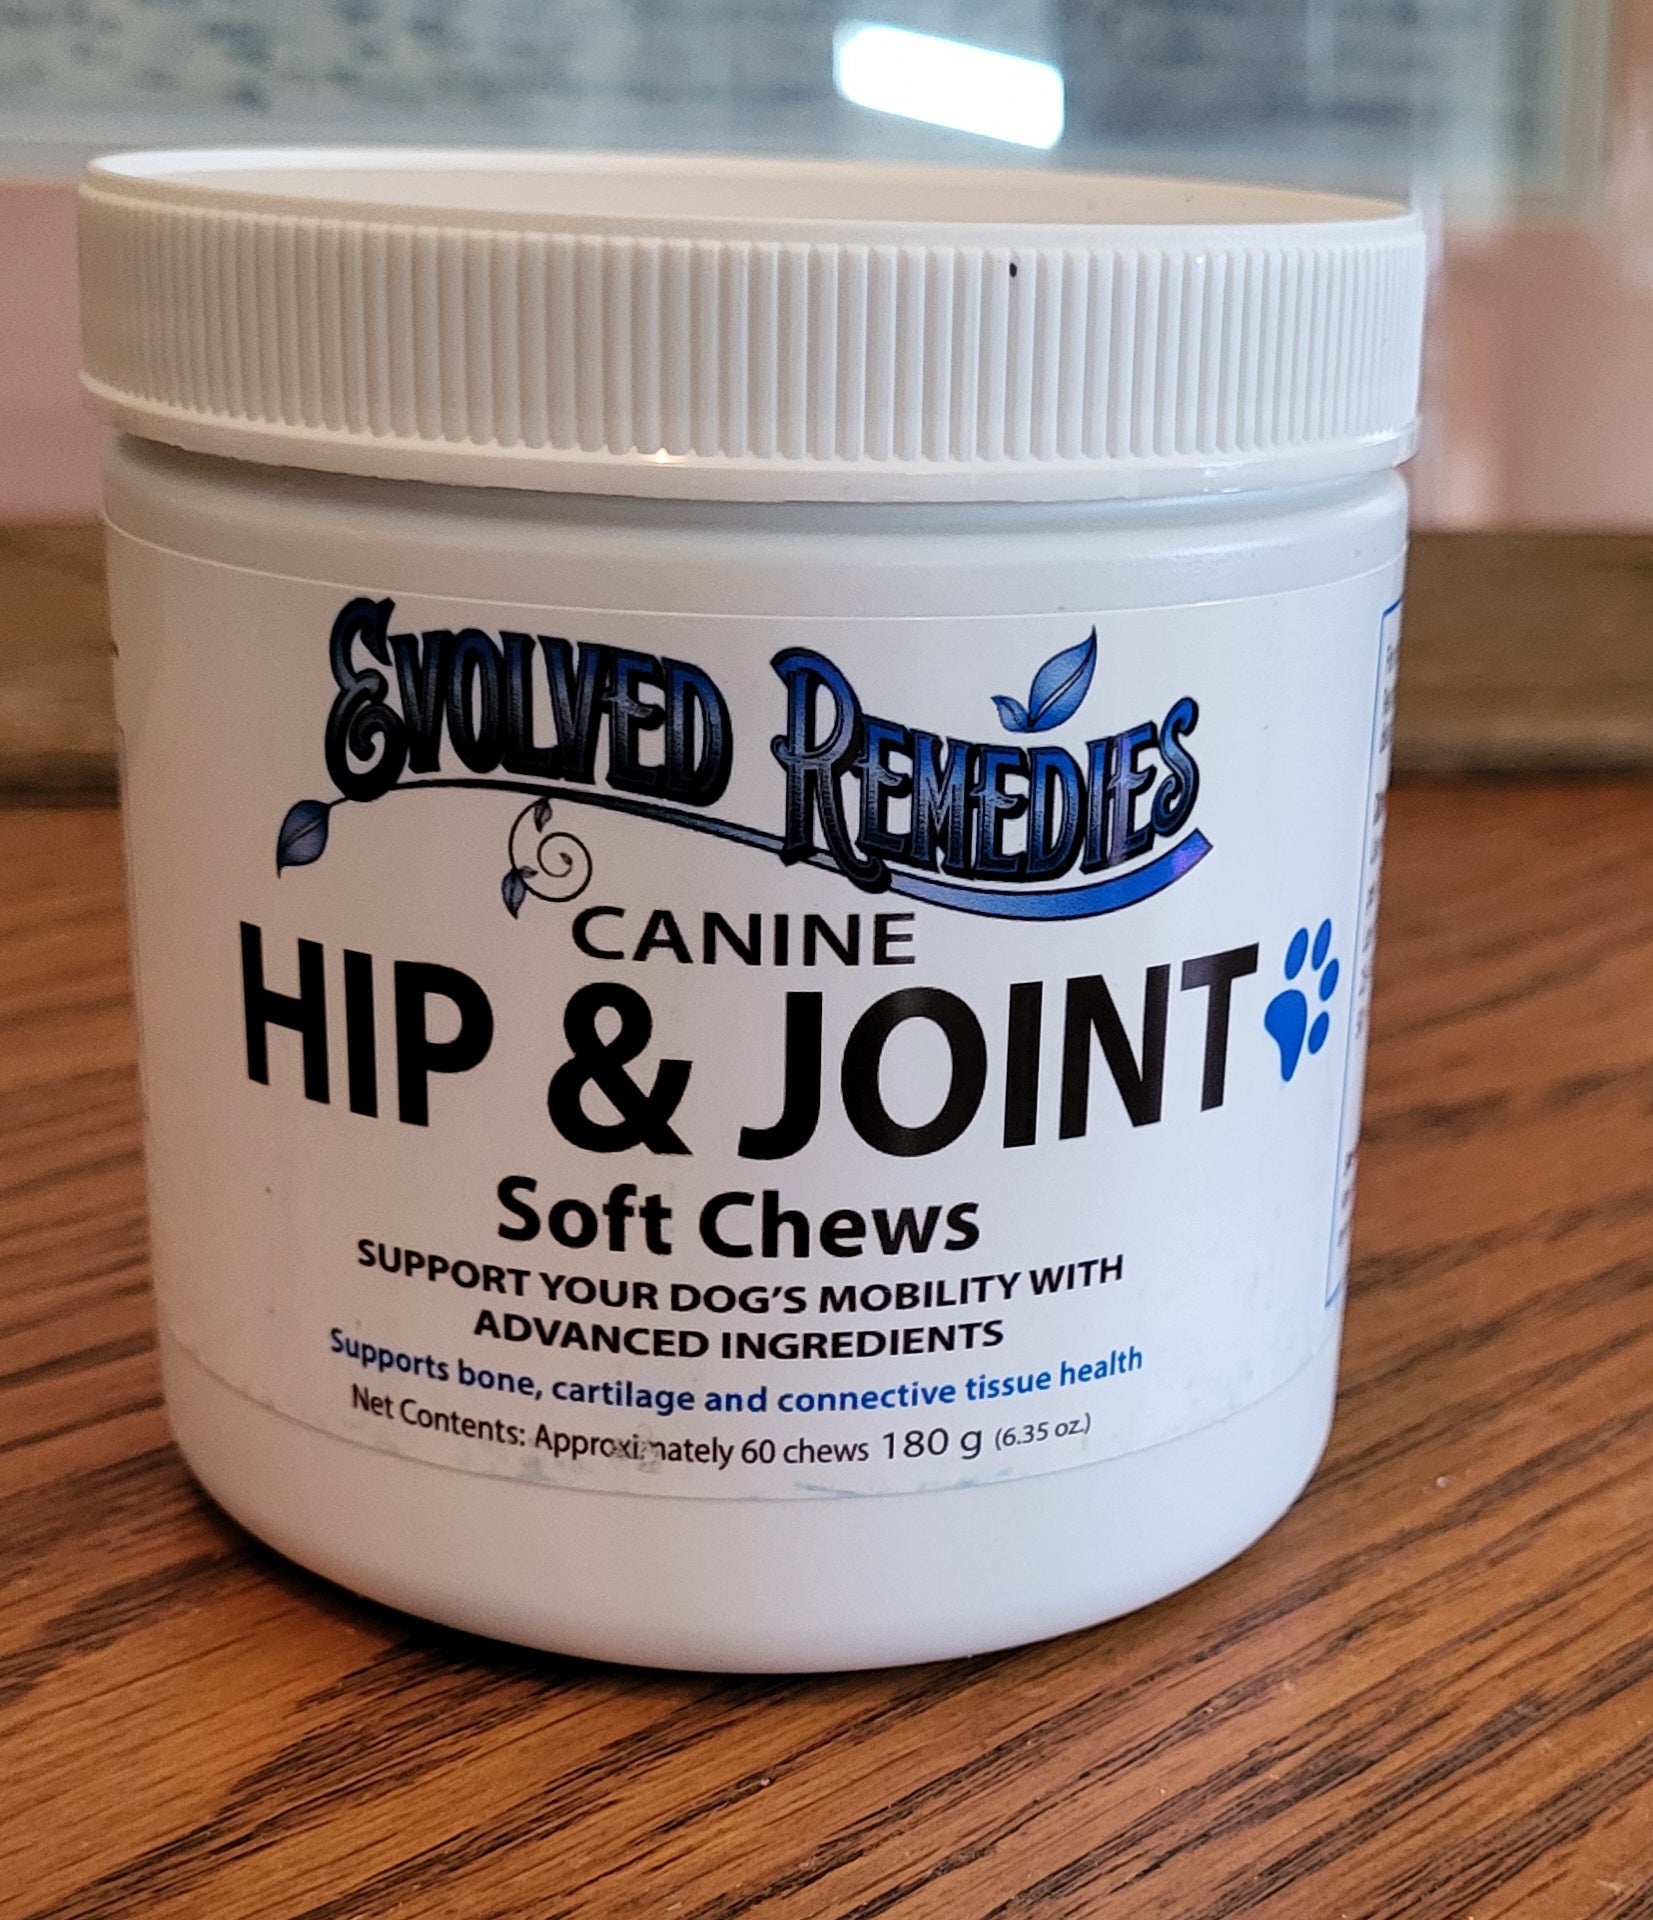 Canine Hip & Joint Soft Chews